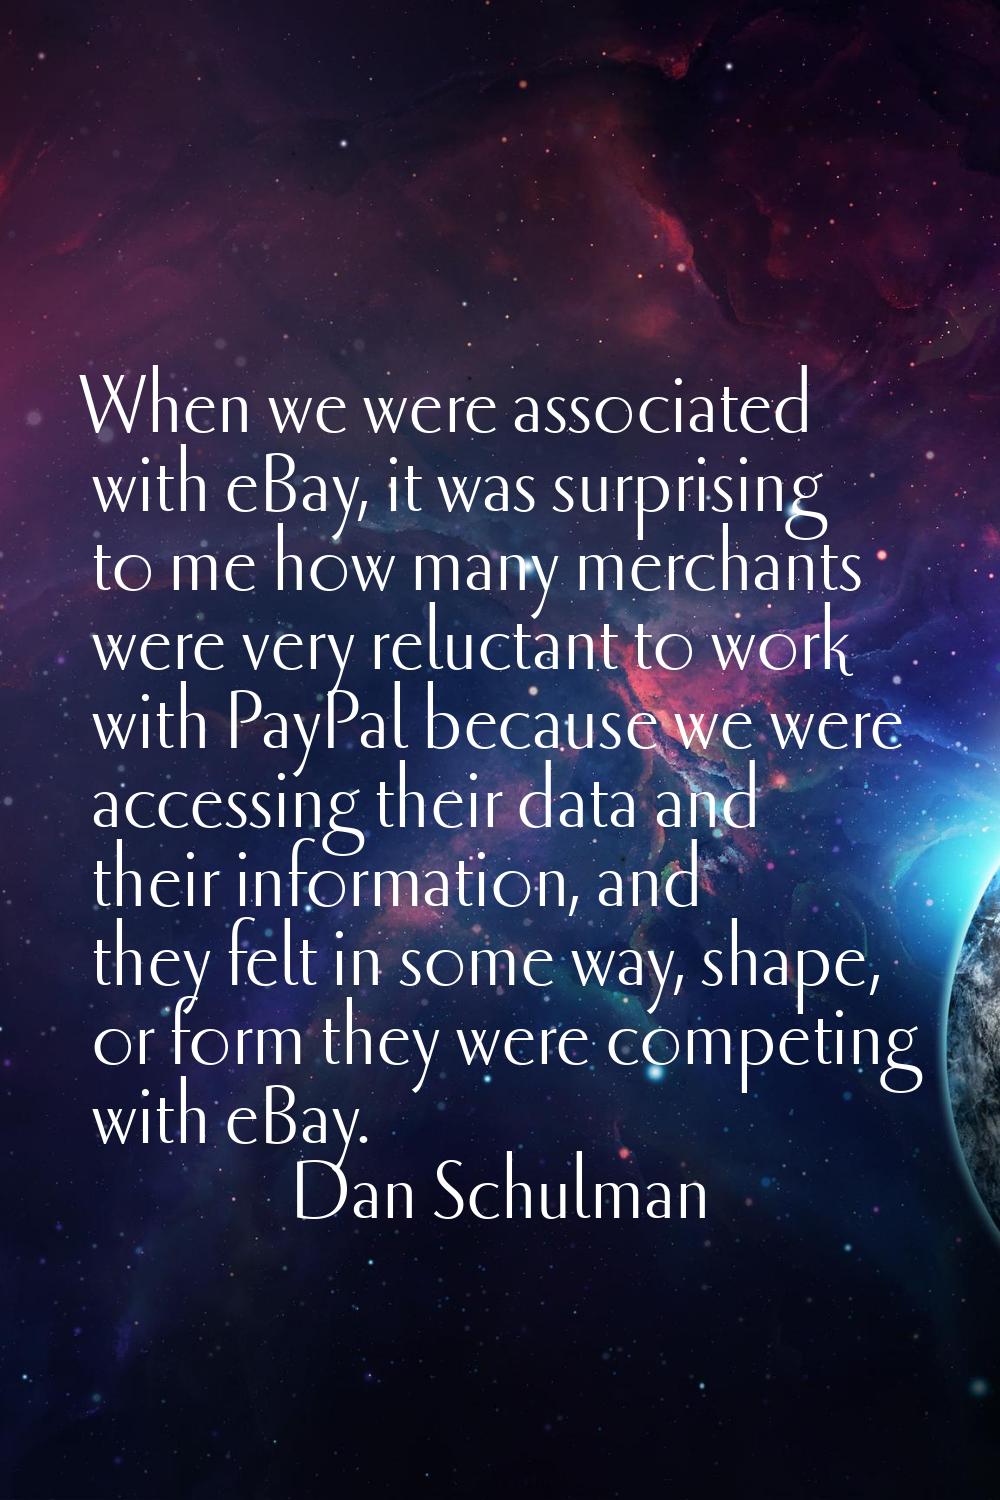 When we were associated with eBay, it was surprising to me how many merchants were very reluctant t